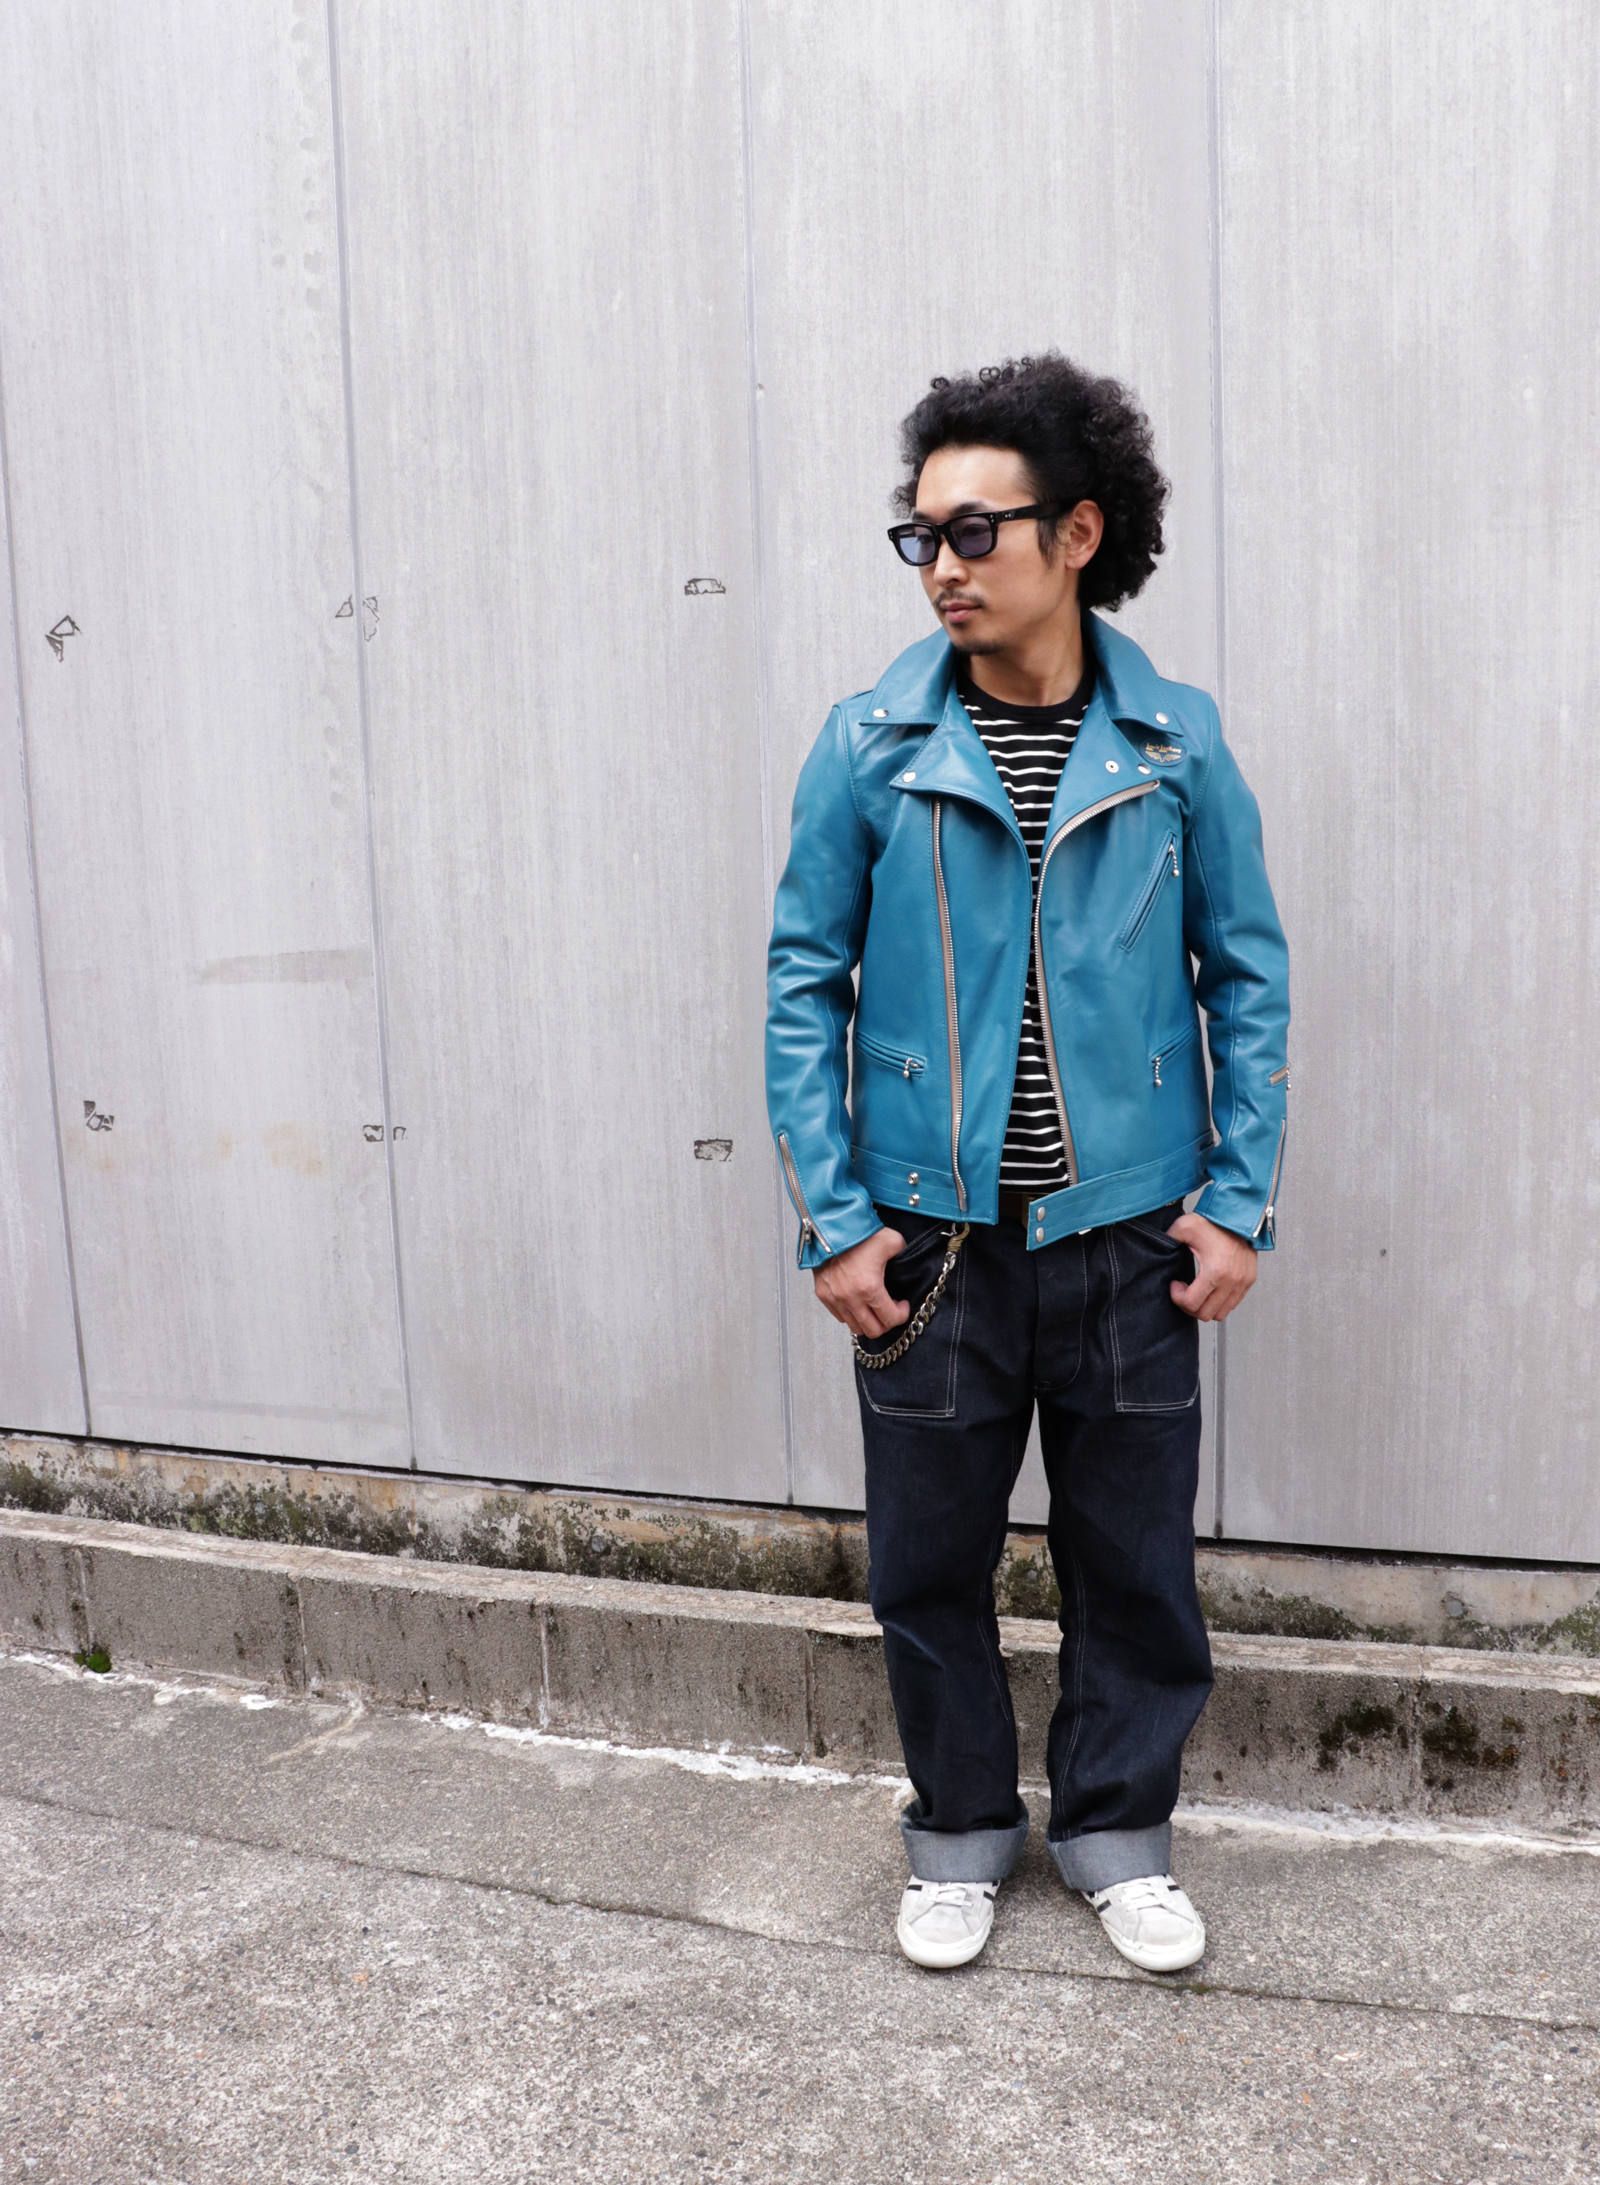 LWEIS LEATHERS : TURQUOISE(ターコイズ)とVINTAGE TURQUOISE